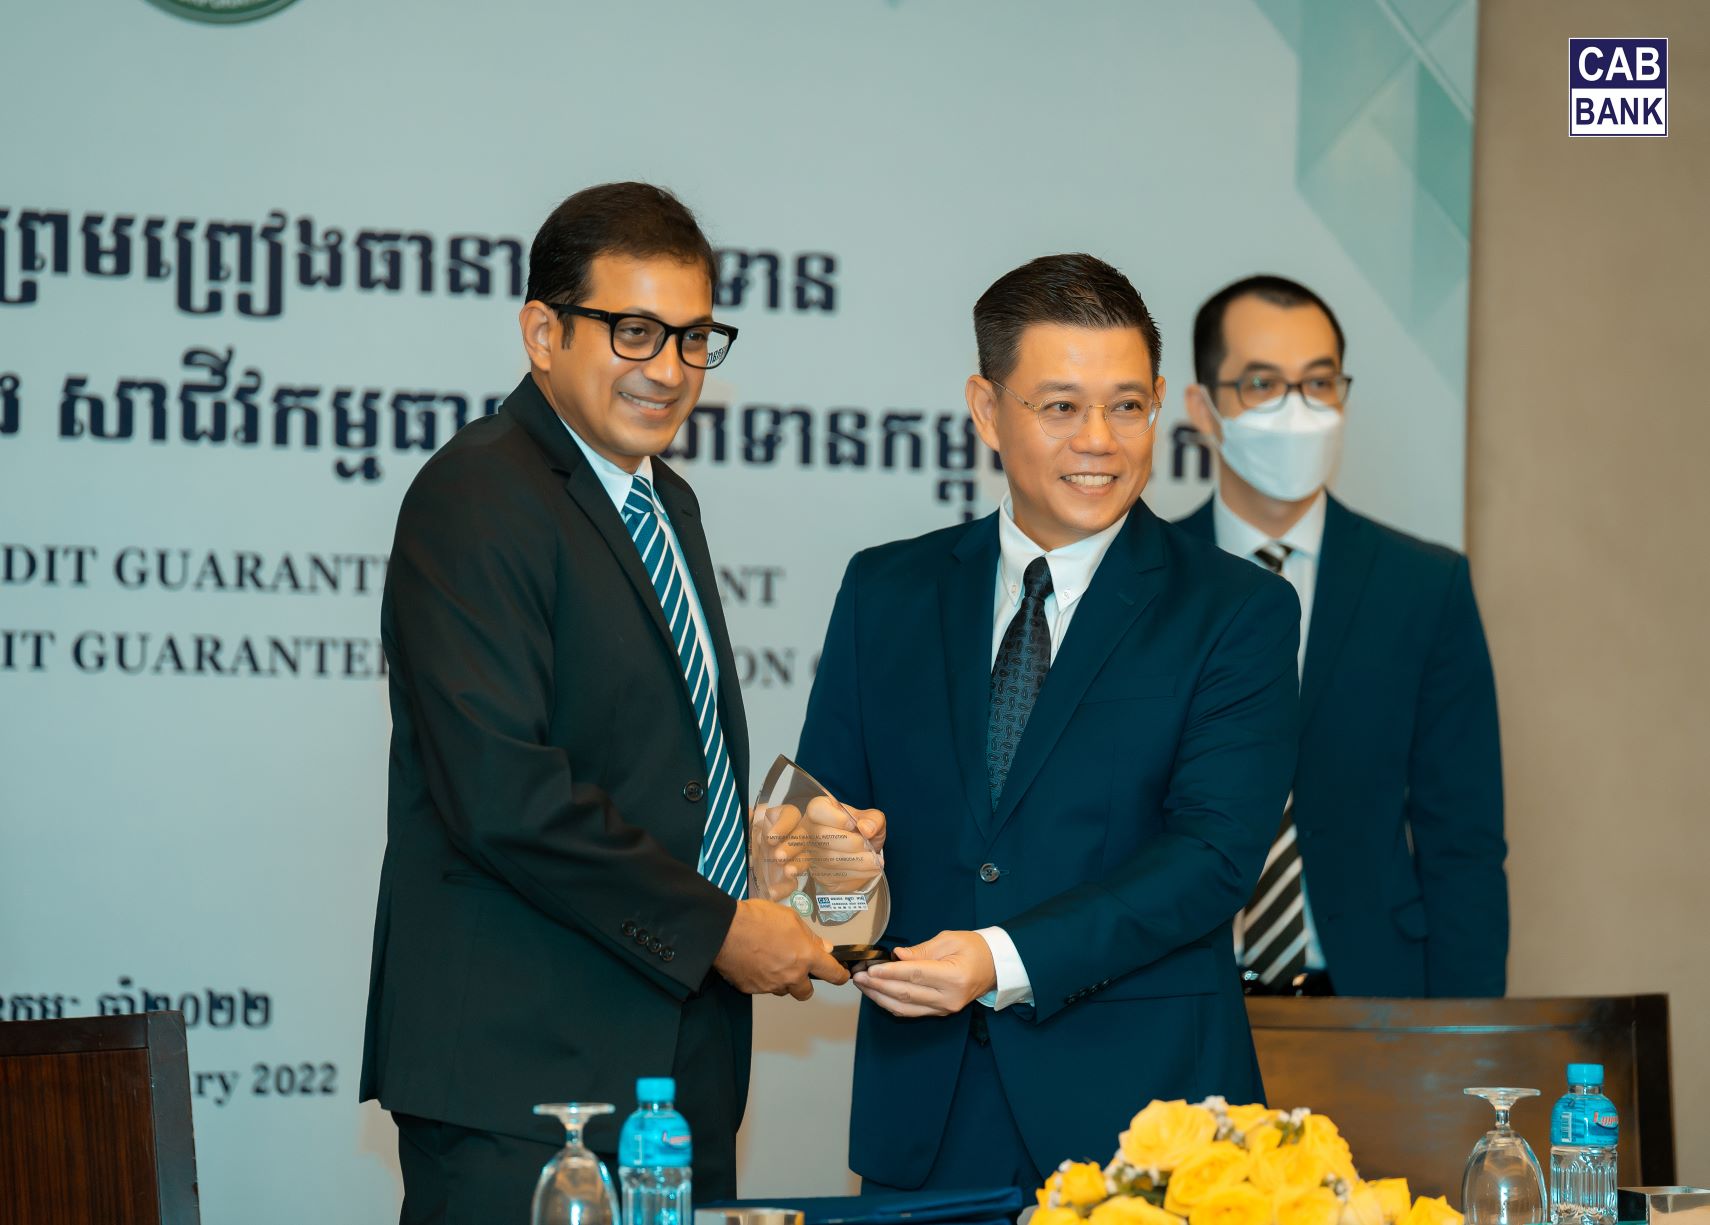 CGCC and CAB Signed on Credit Guarantee Agreement to Provide Loans to MSMEs and Large Businesses Which Lack Collaterals